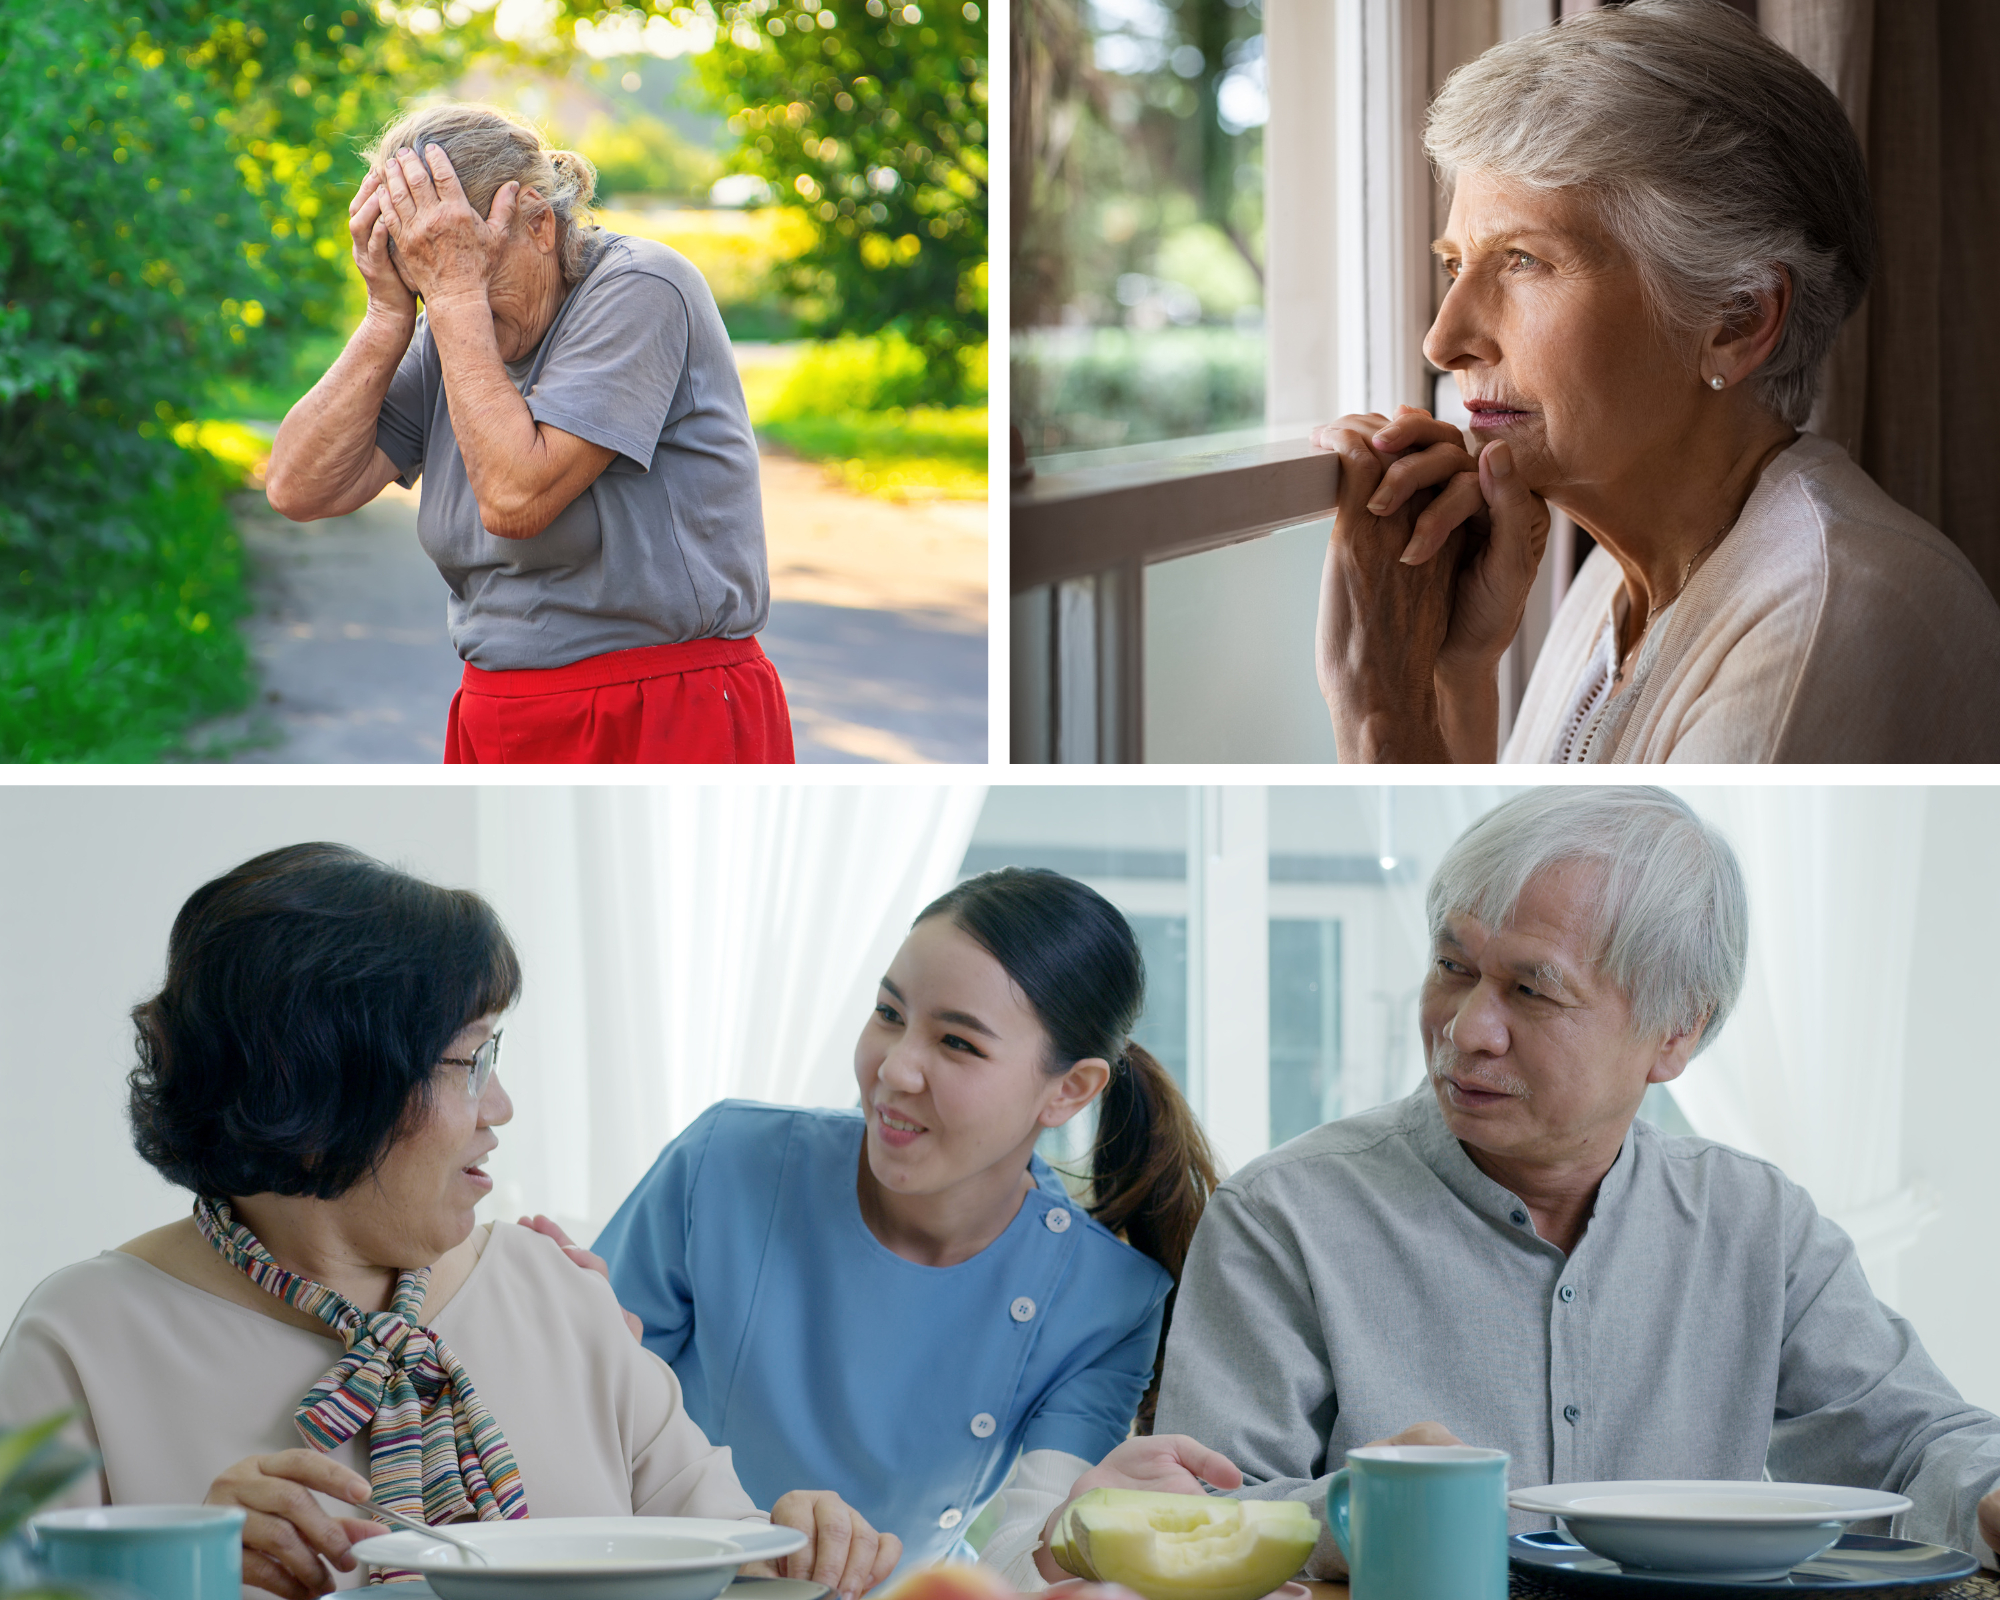 Learn about dementia for the sake of your loved one